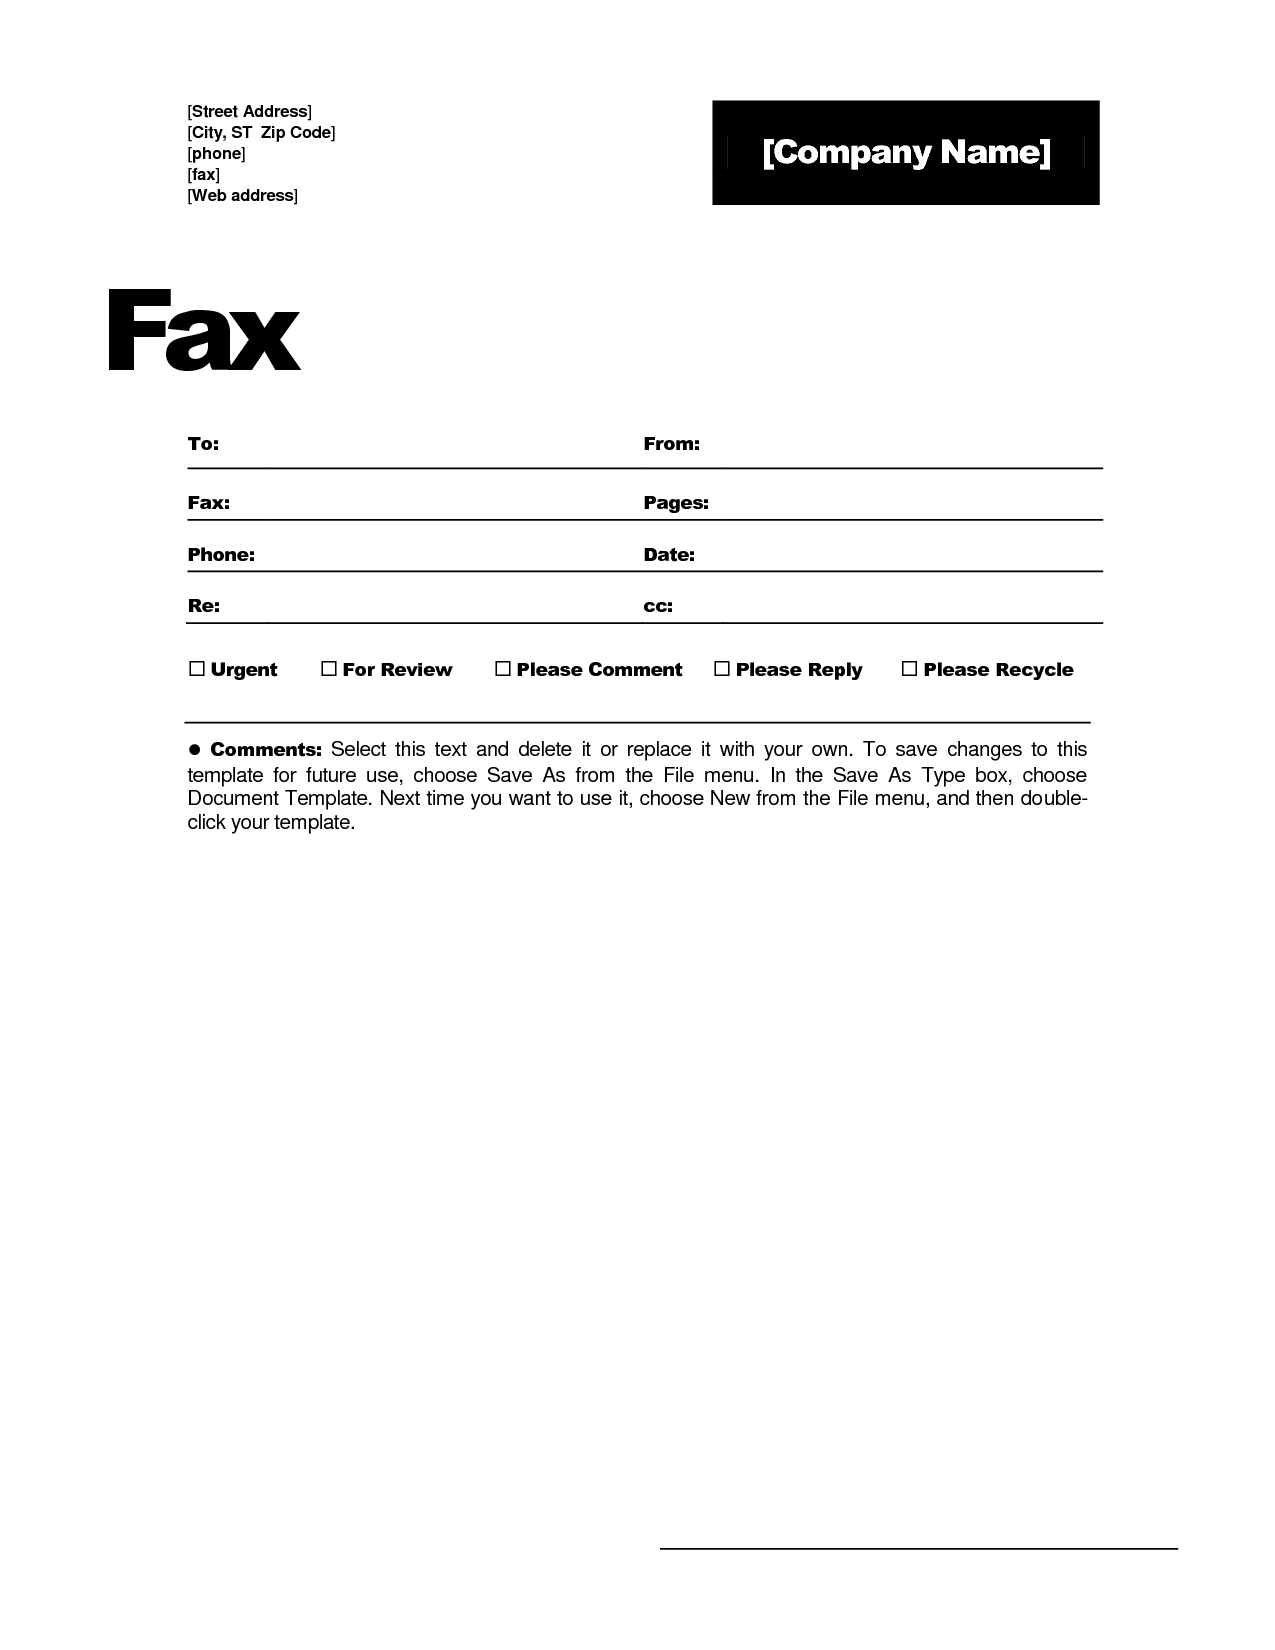 Fax Template In Word 2010 - Calep.midnightpig.co Intended For Fax Template Word 2010